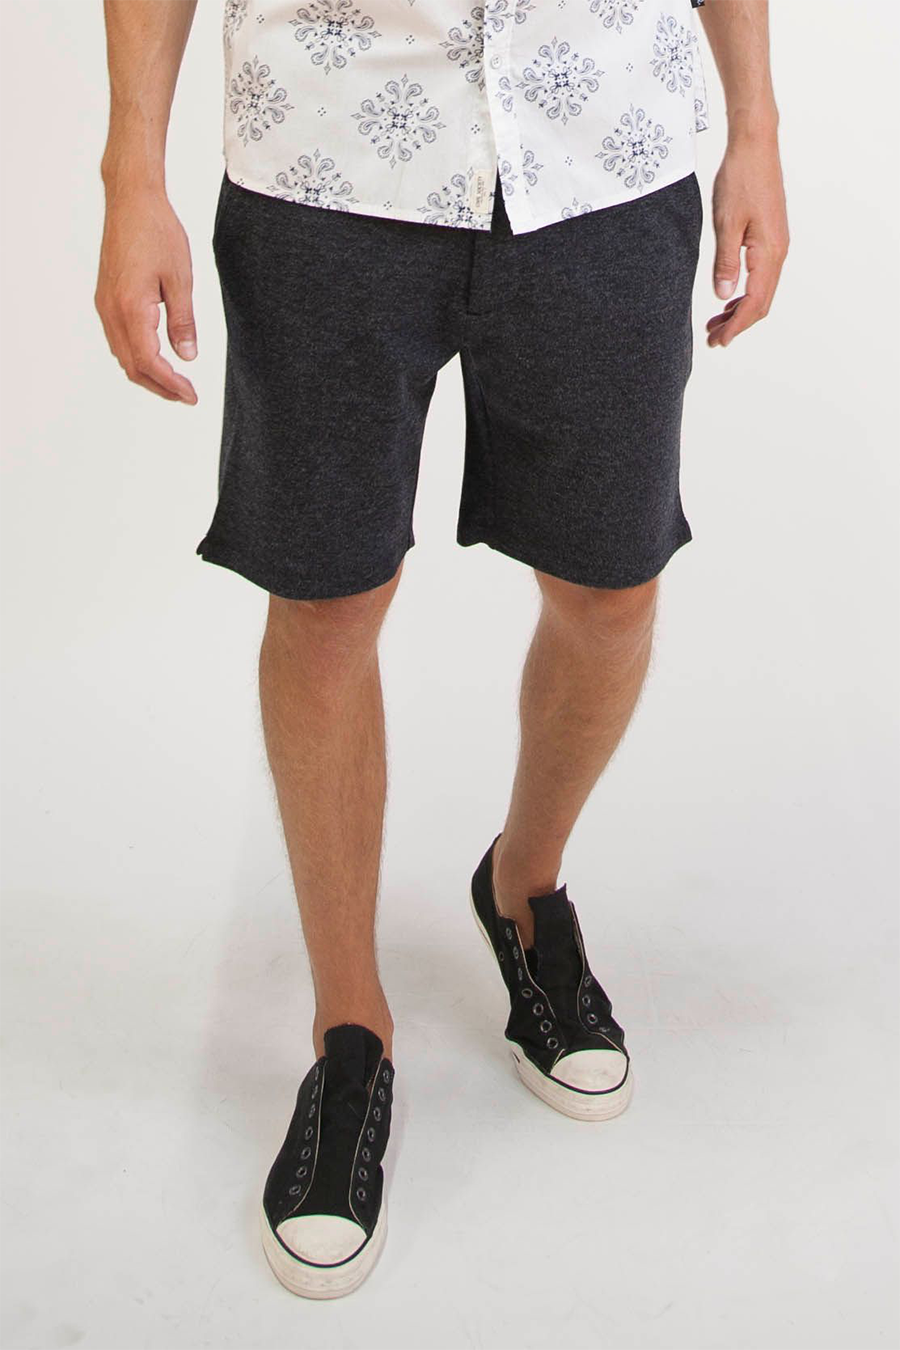 Templeton Knit Shorts | Heather Charcoal - Main Image Number 1 of 1